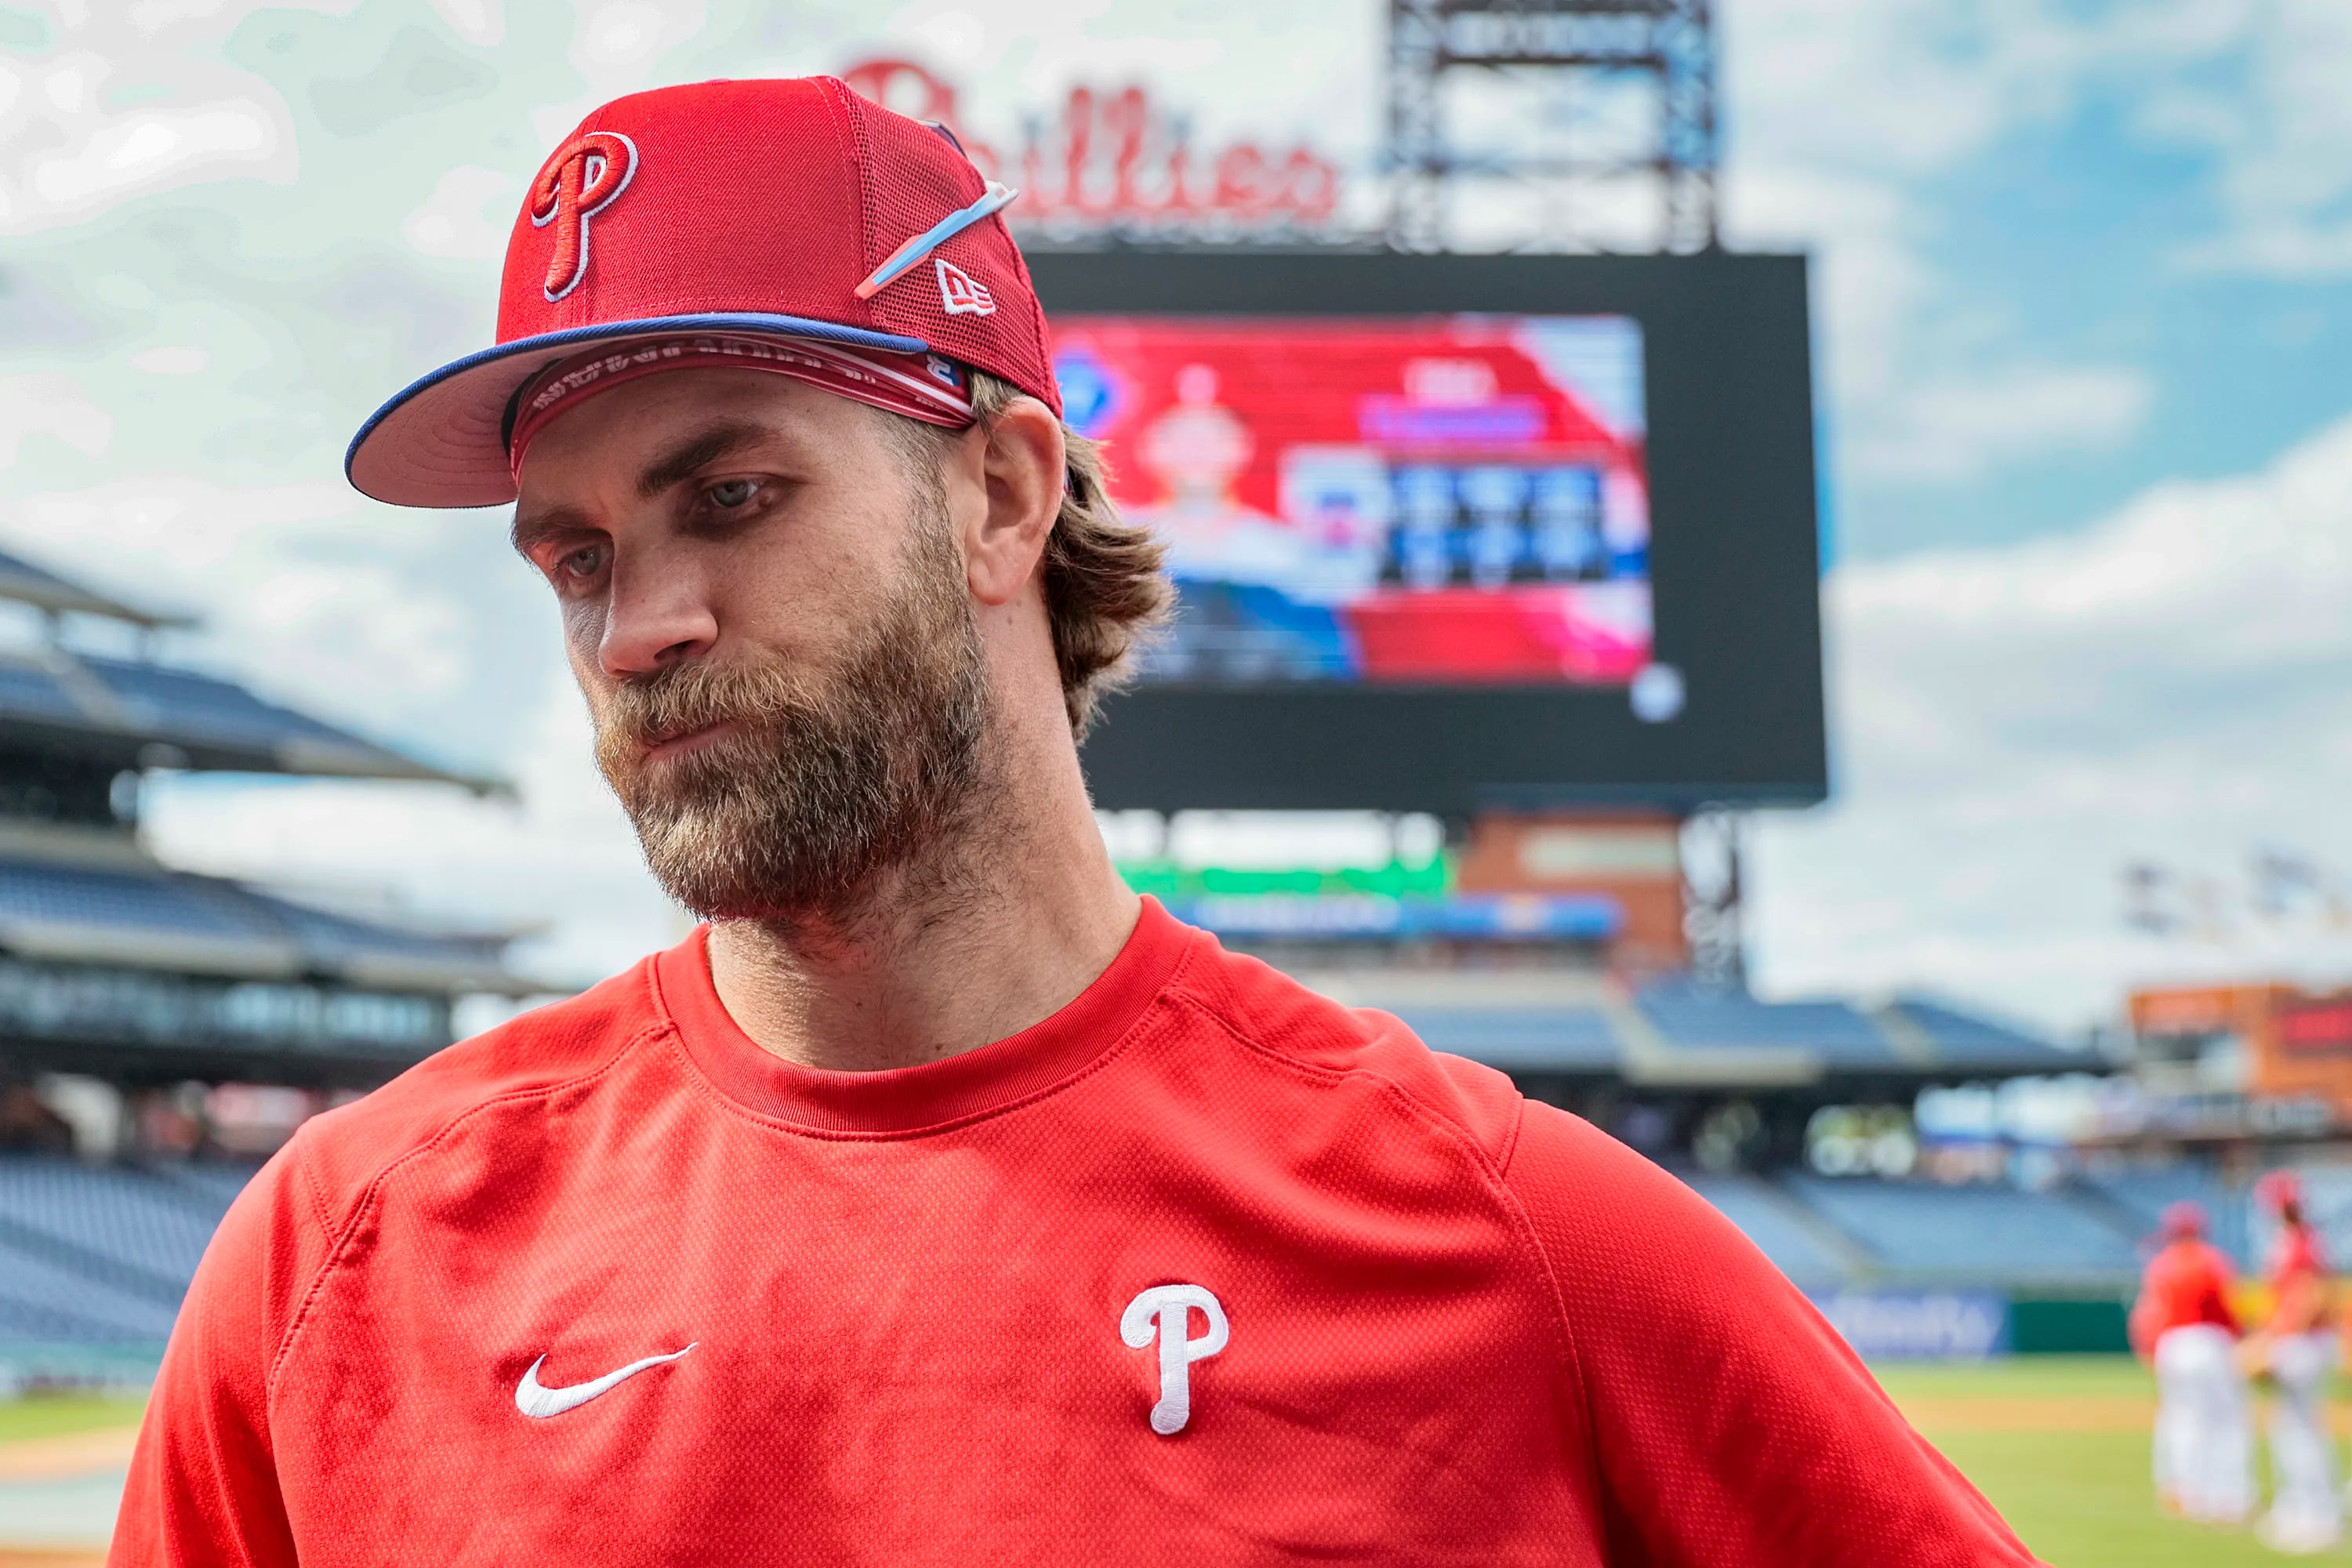 Bryce Harper returns to the Phillies' lineup after missing 1 game